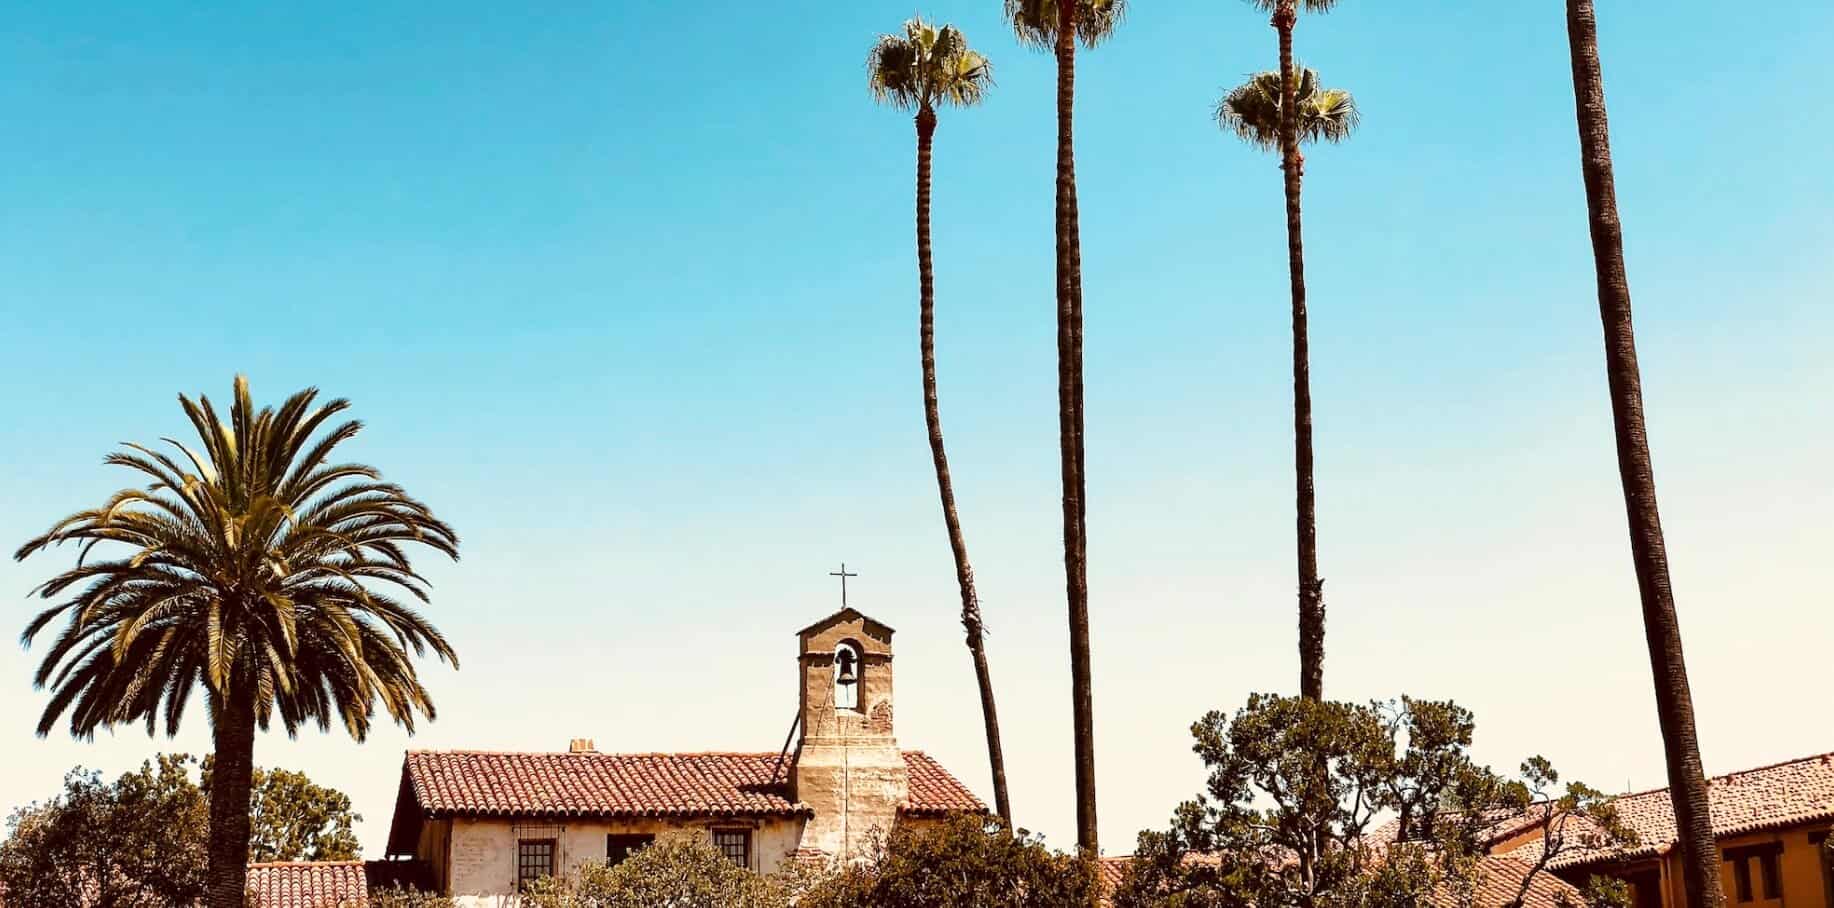 A picture of a Catholic California mission surrounded by palm trees and a blue sky backdrop.